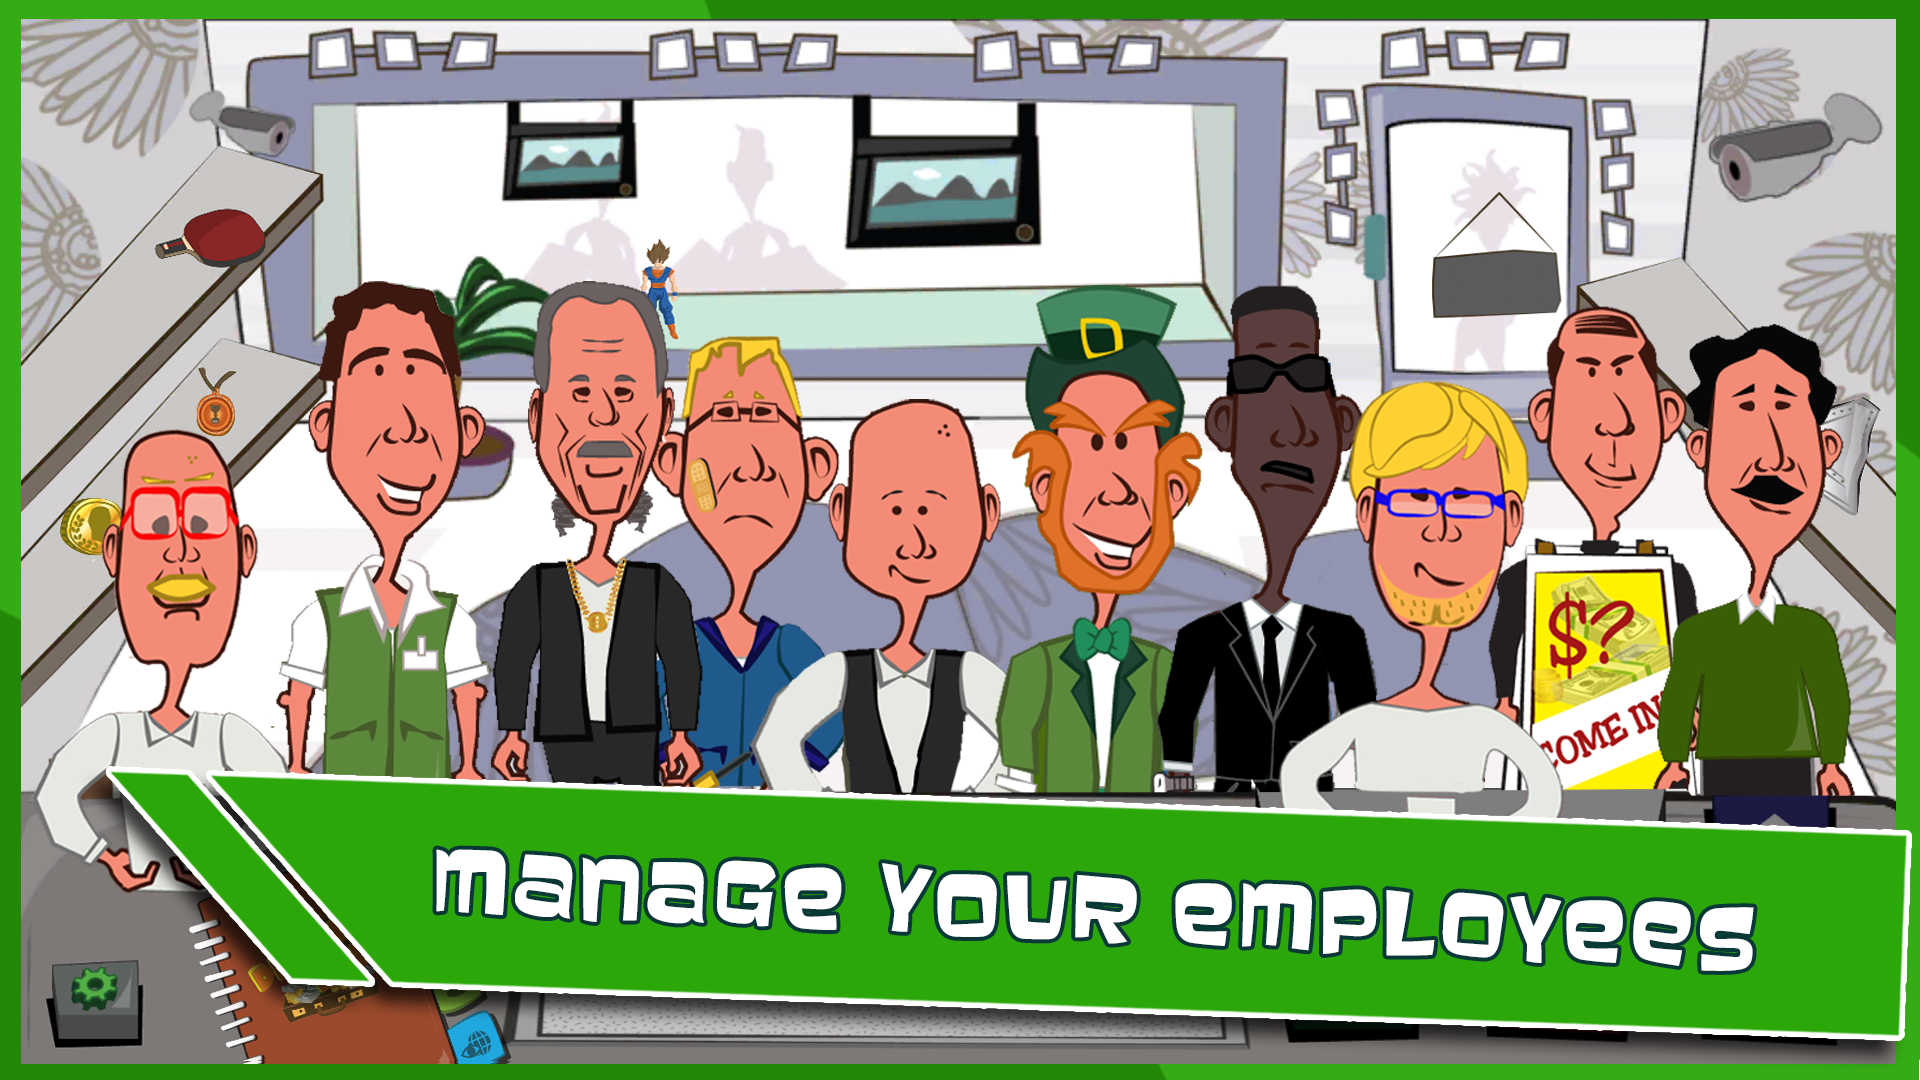 Dealer’s Life – pawn shop Tycoon. Симулятор ломбарда. Pawn Разработчик. Pawn shop Management games. Life deal